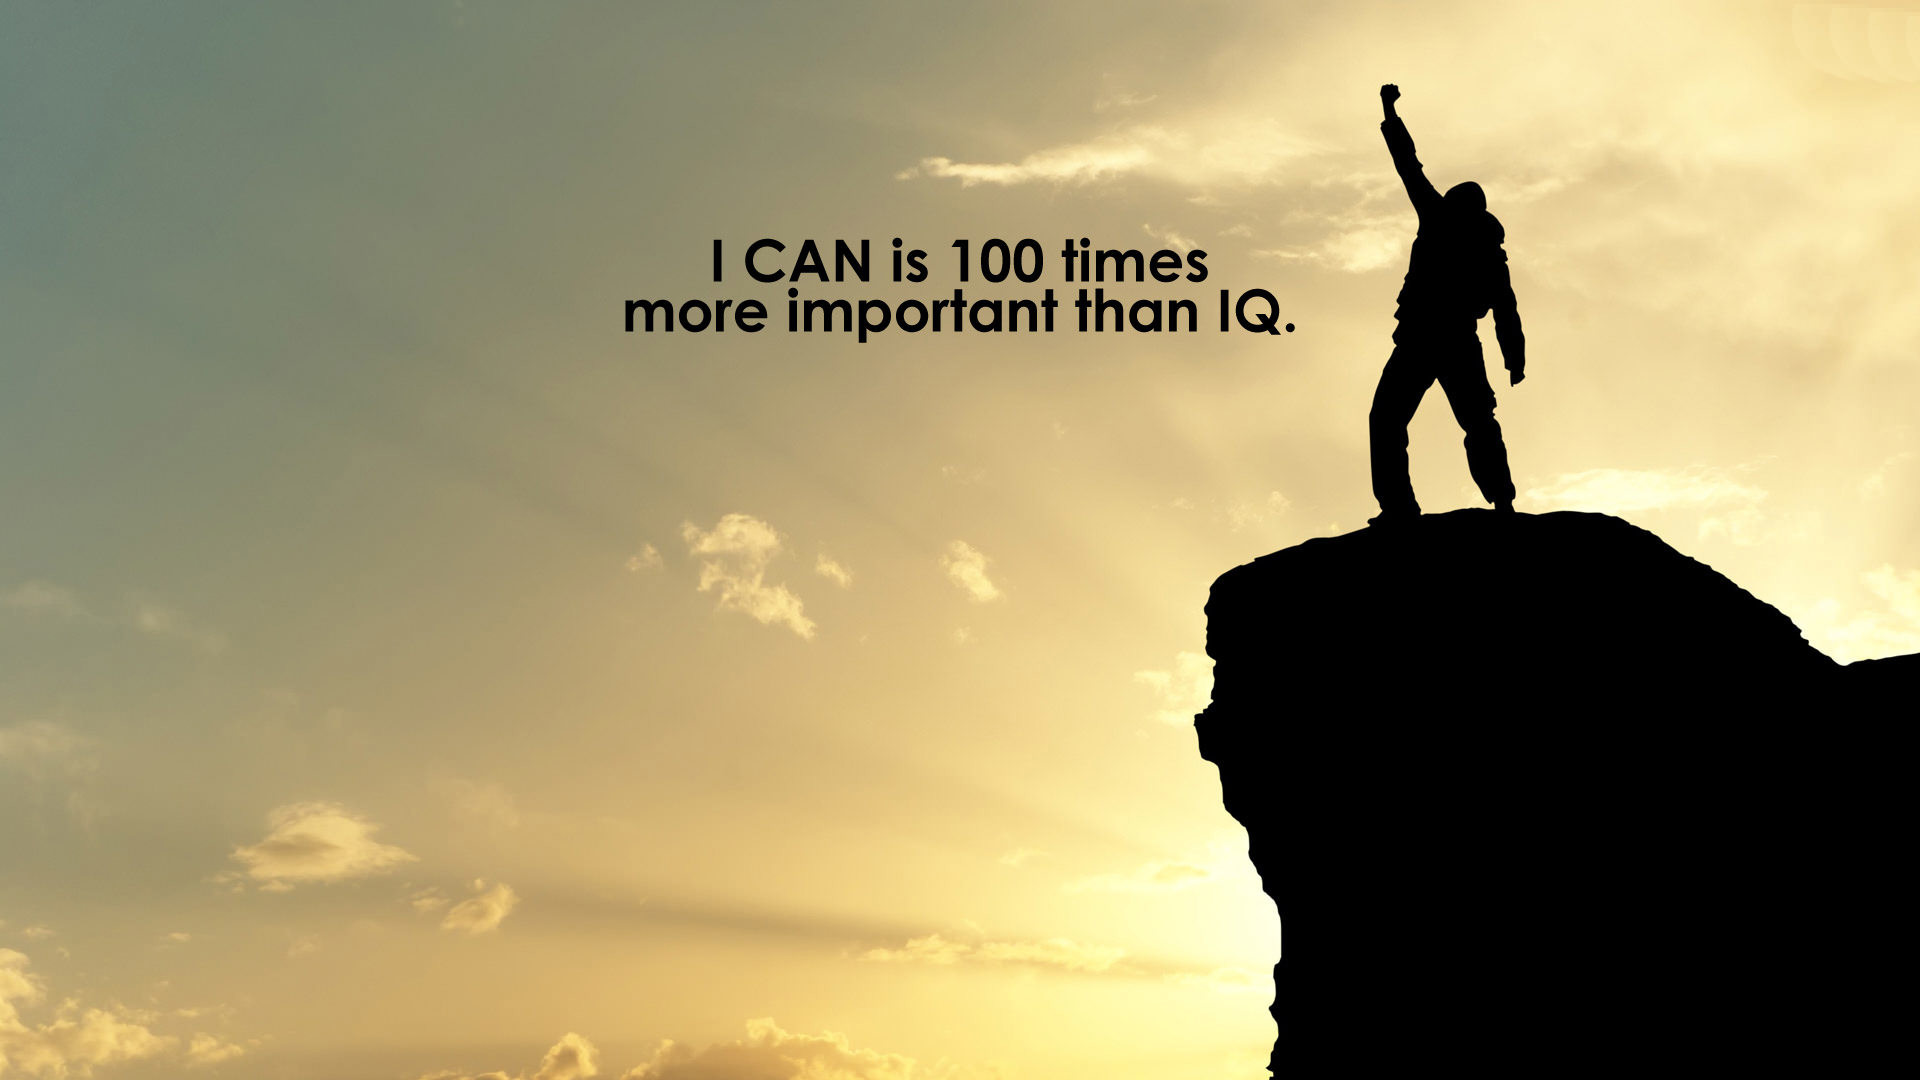 1920x1080 I can is 100 times more important than IQ.